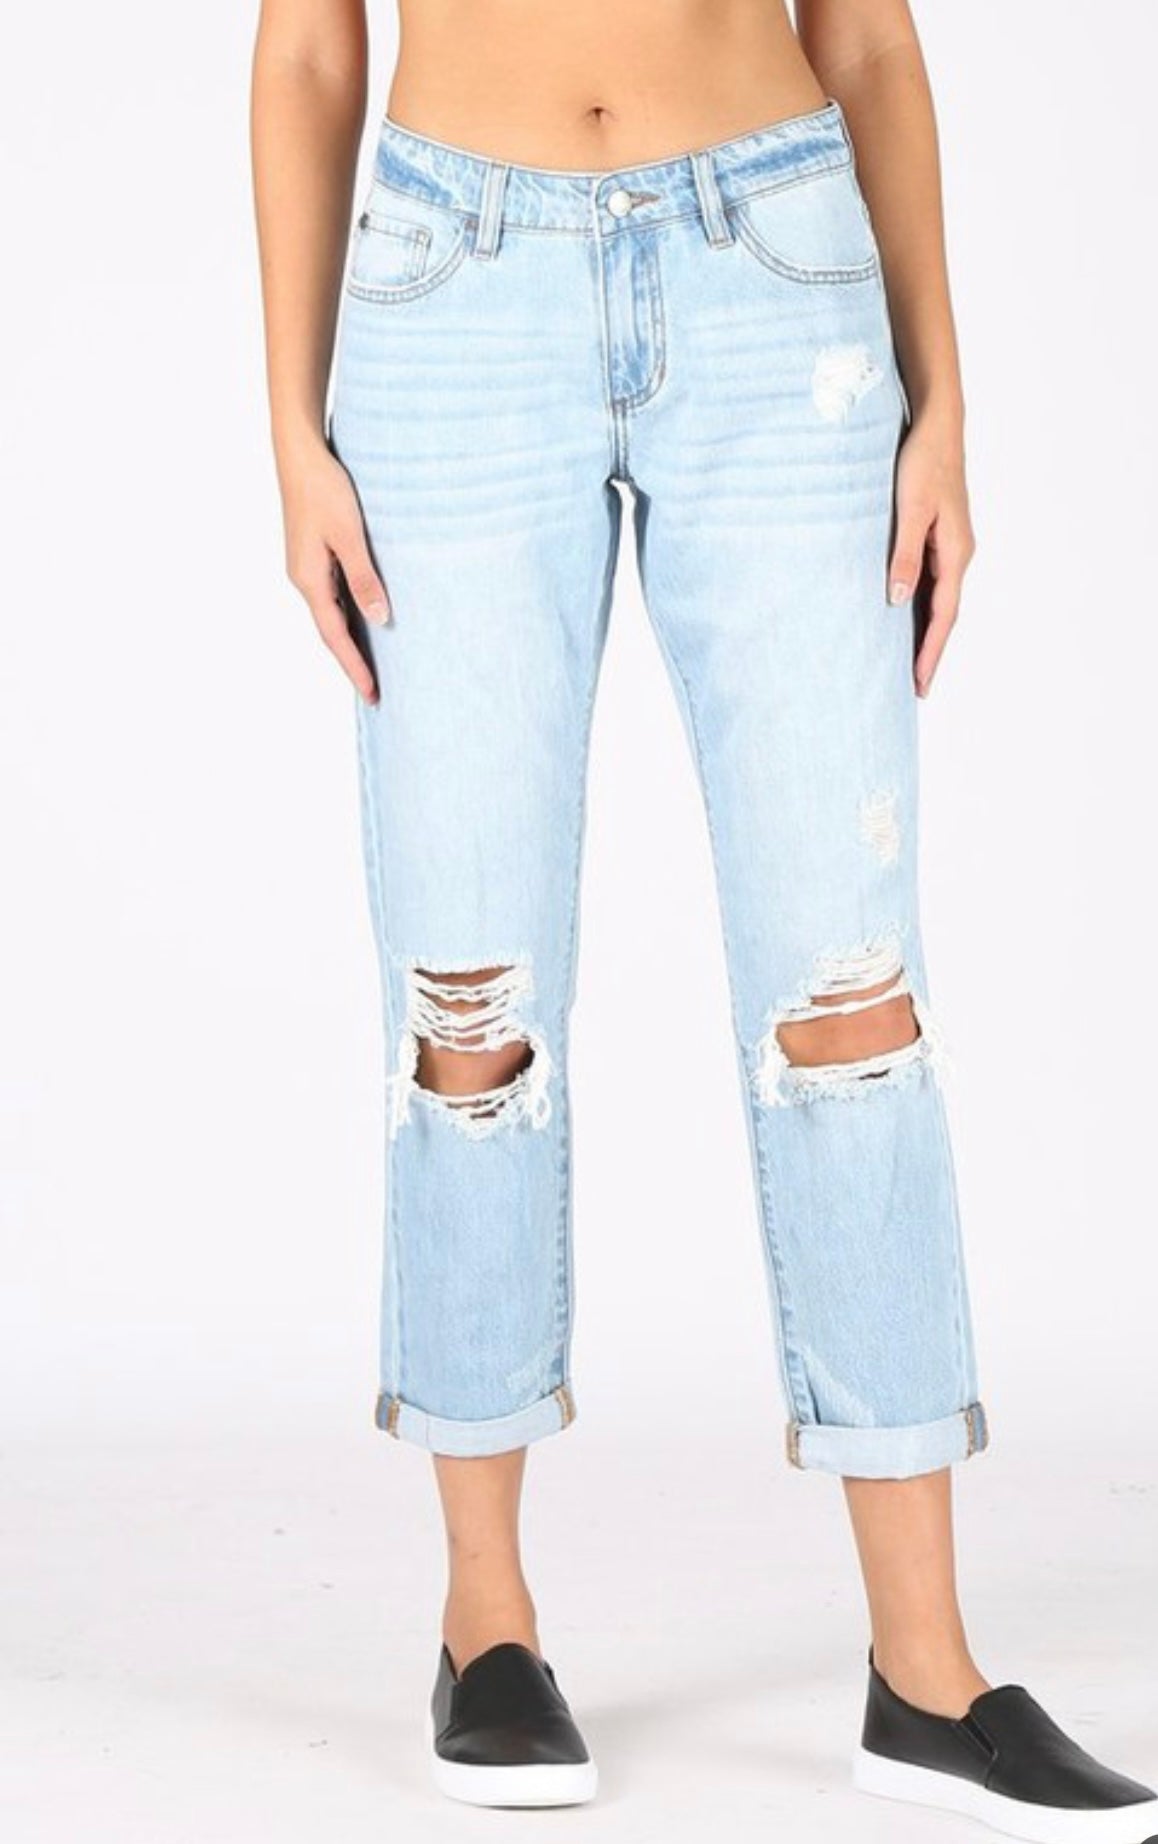 Skyrise Ripped Jeans